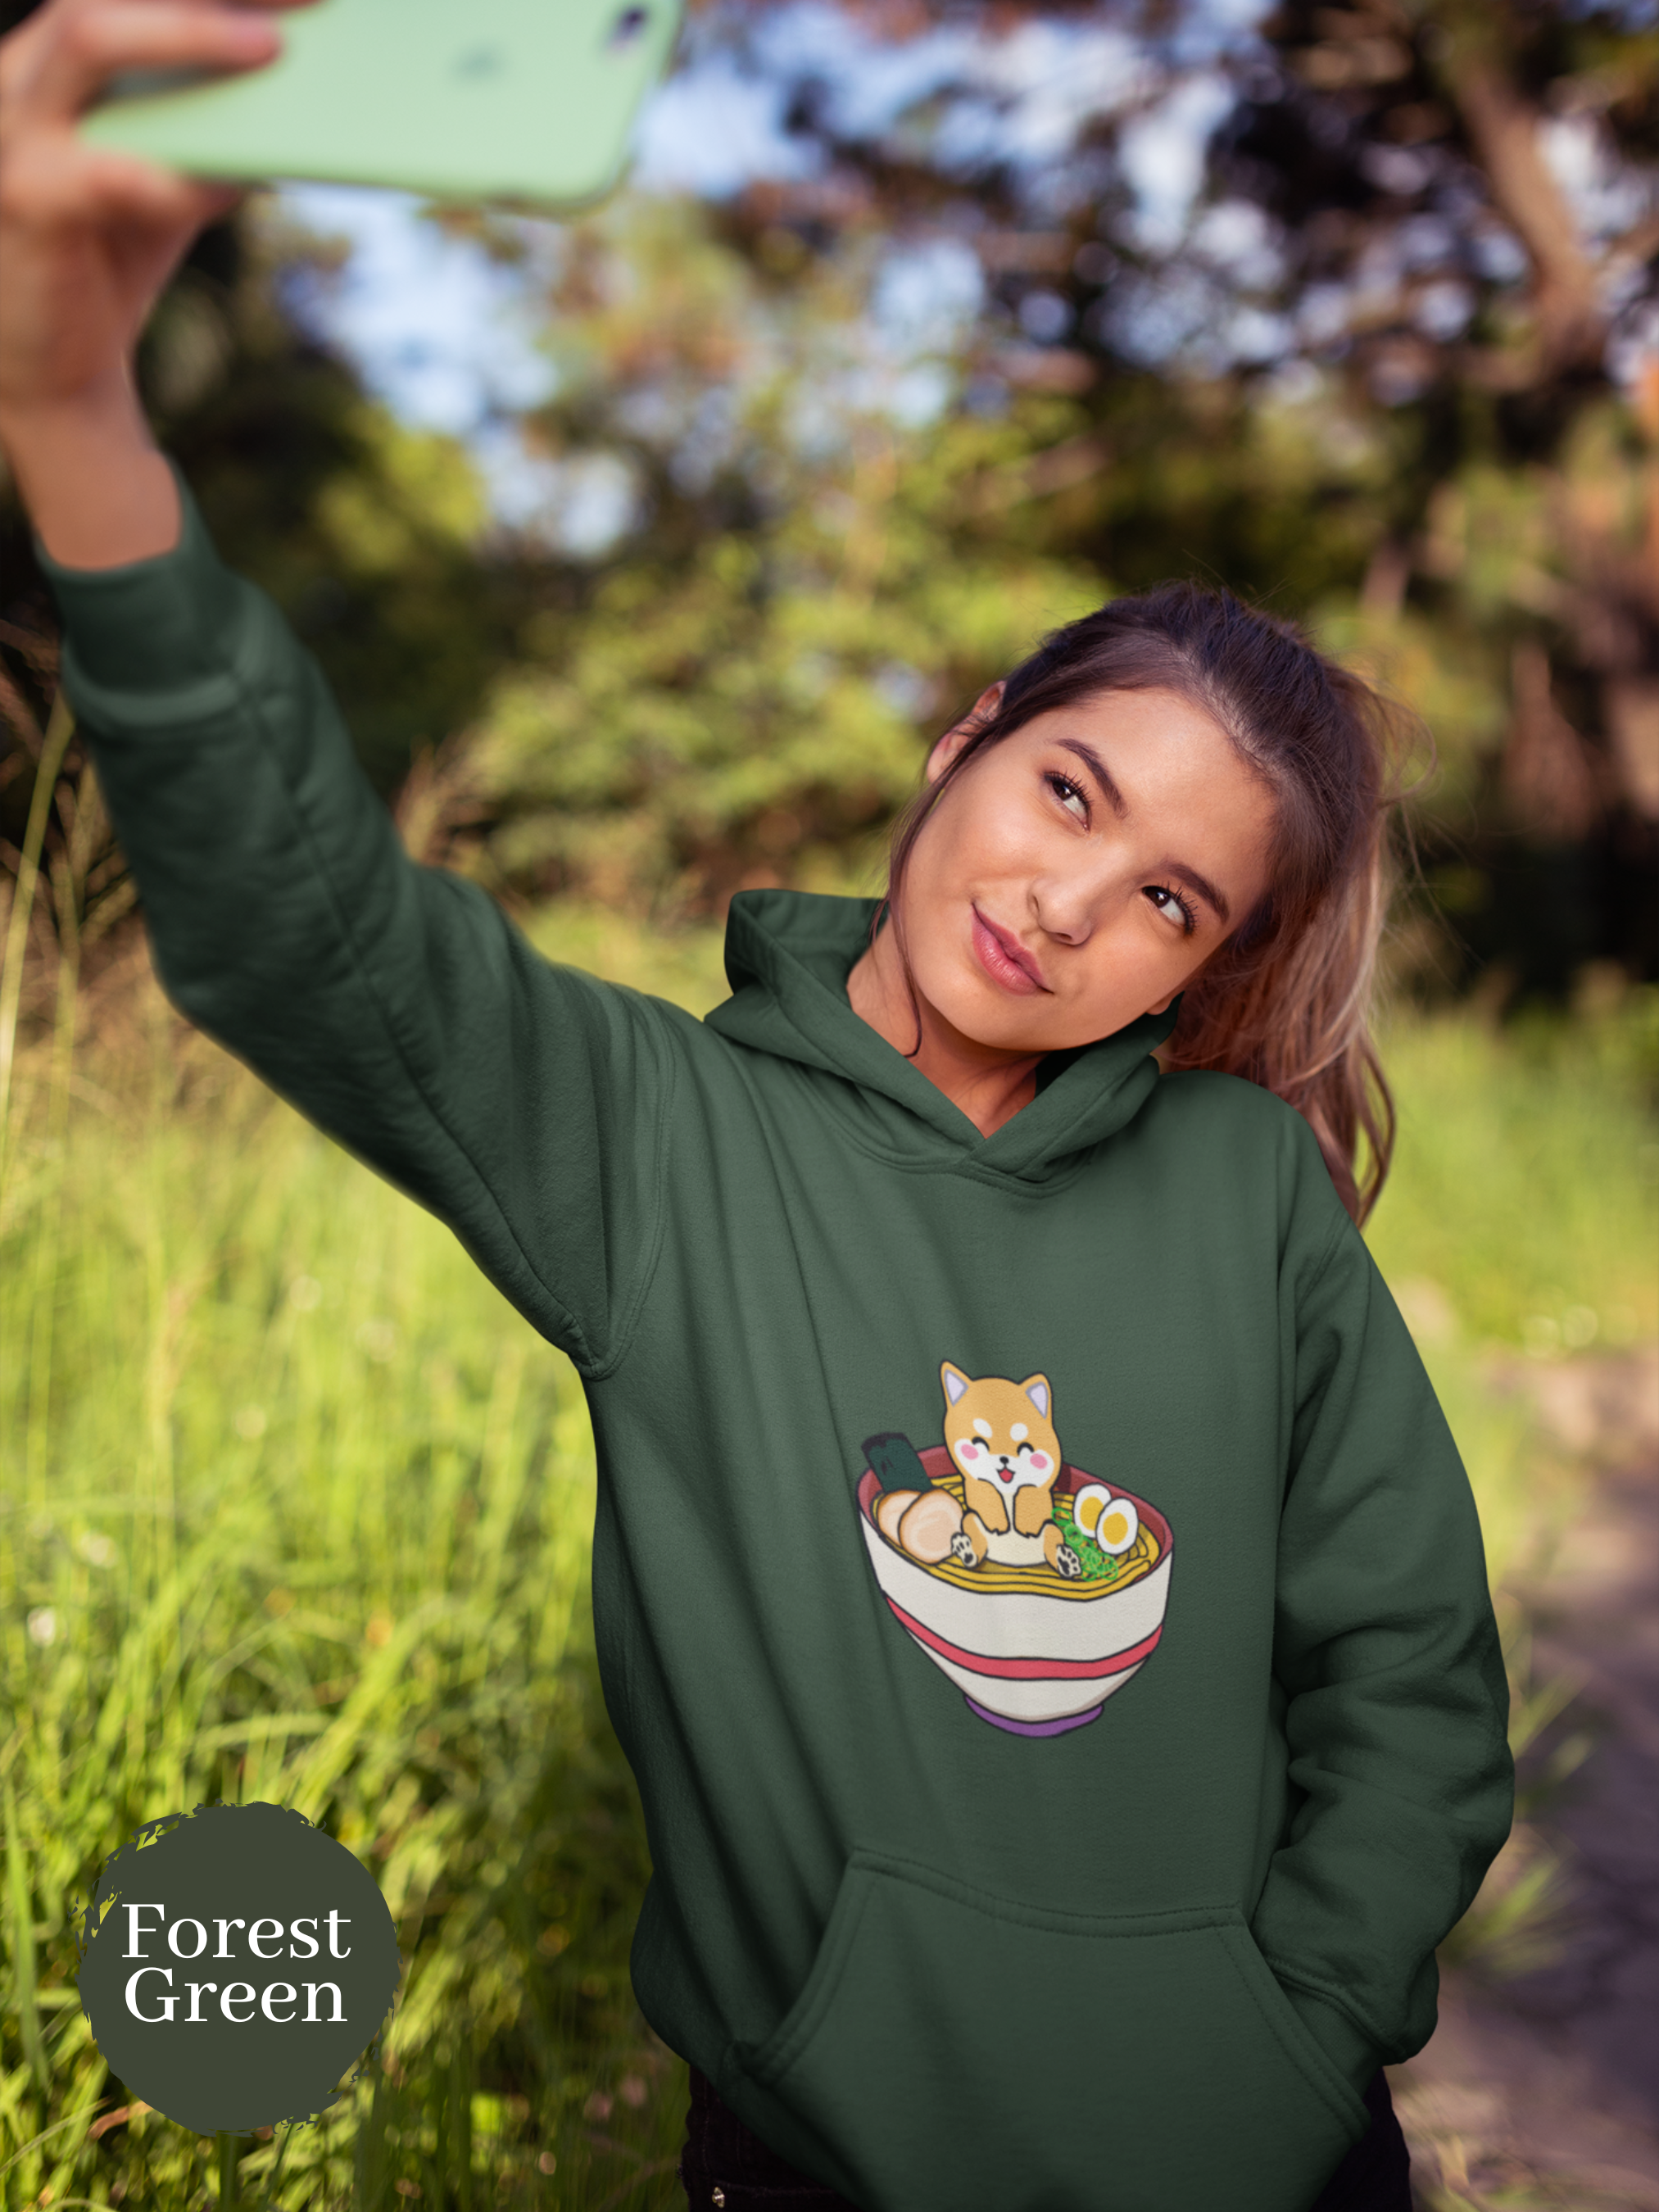 Ramen Hoodie: Cute Shiba Inu in a Bowl of Noodles - A Must-Have for Foodie Hoodies and Ramen Art Fans